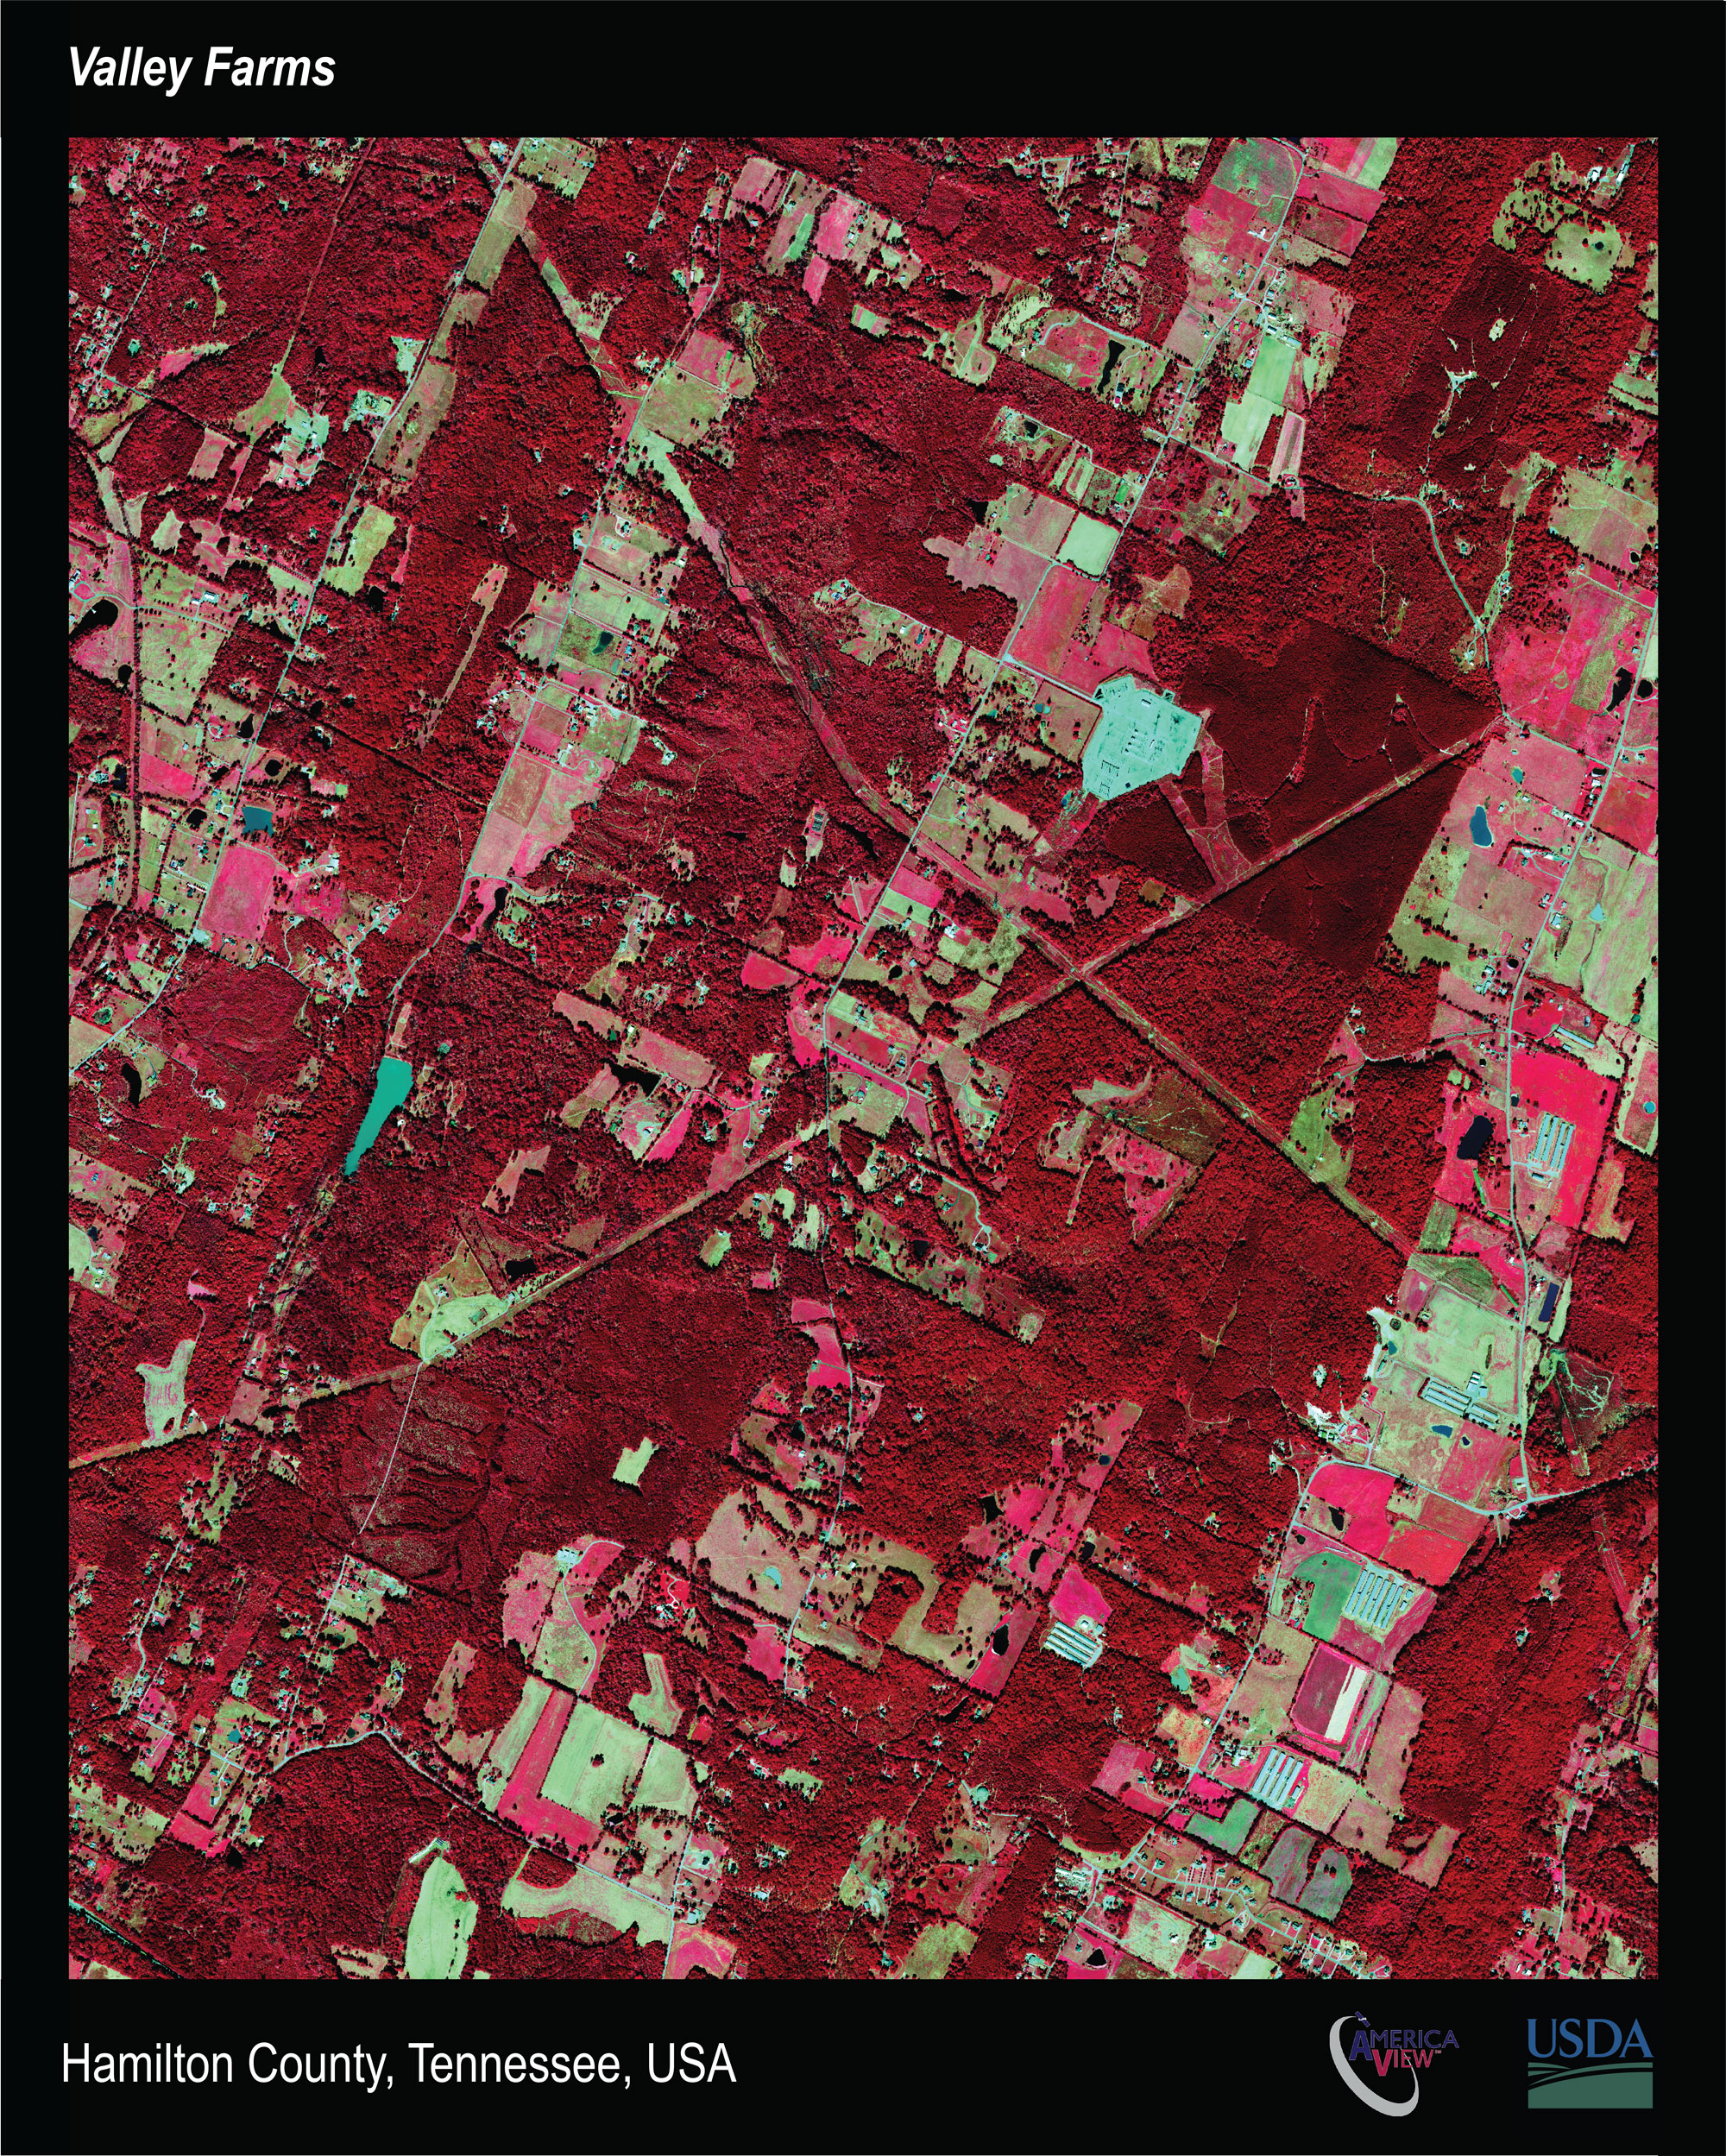 Satellite images of Hamilton County, Tennessee